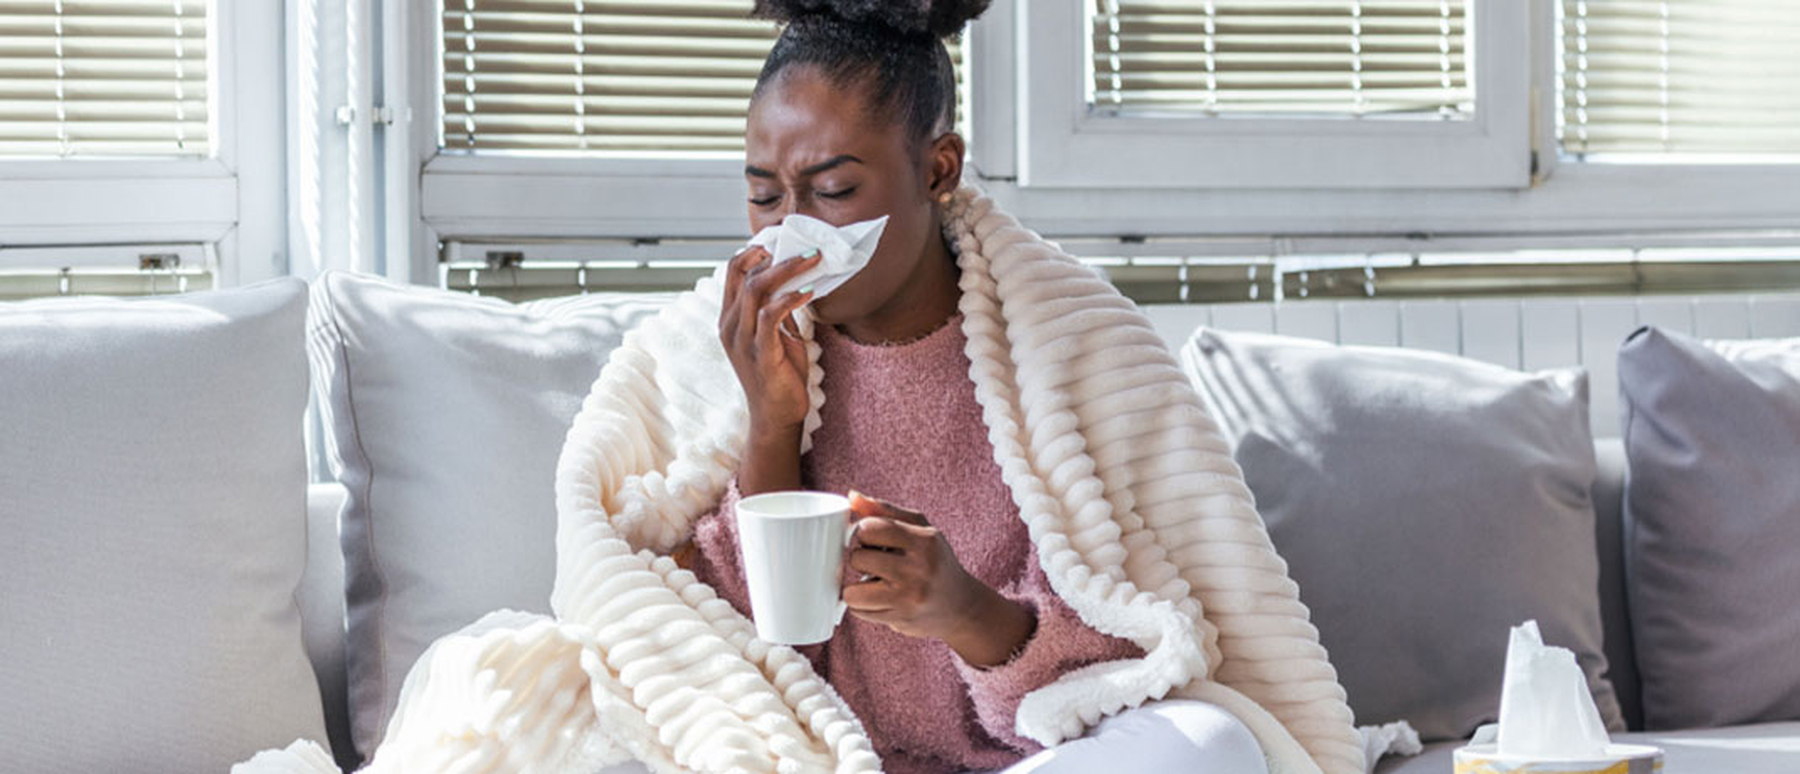 Get Ready for Cold and Flu Season with Savings on Health Products